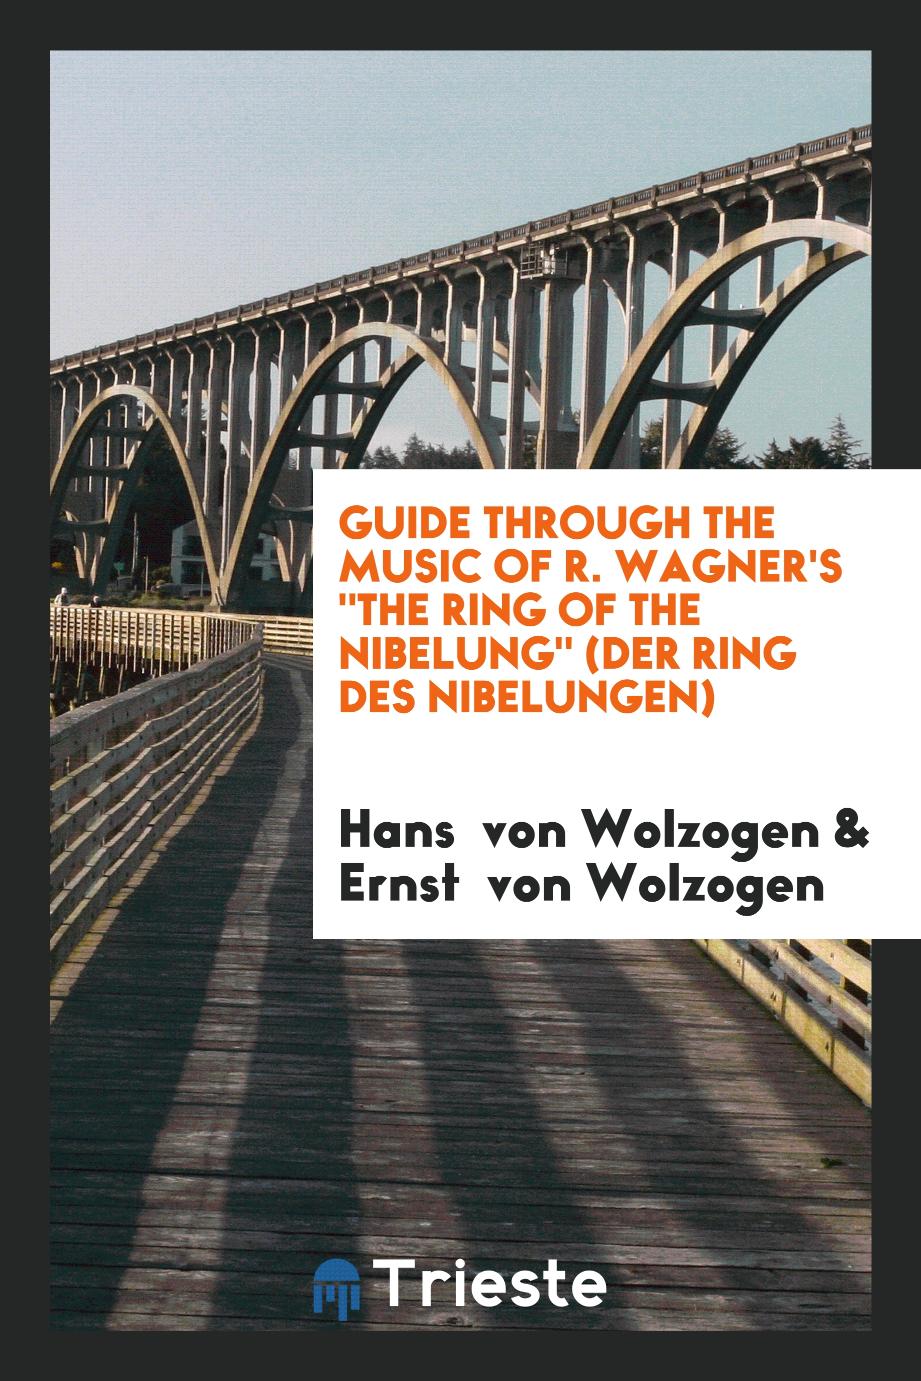 Guide Through the Music of R. Wagner's "The Ring of the Nibelung" (Der Ring Des Nibelungen)